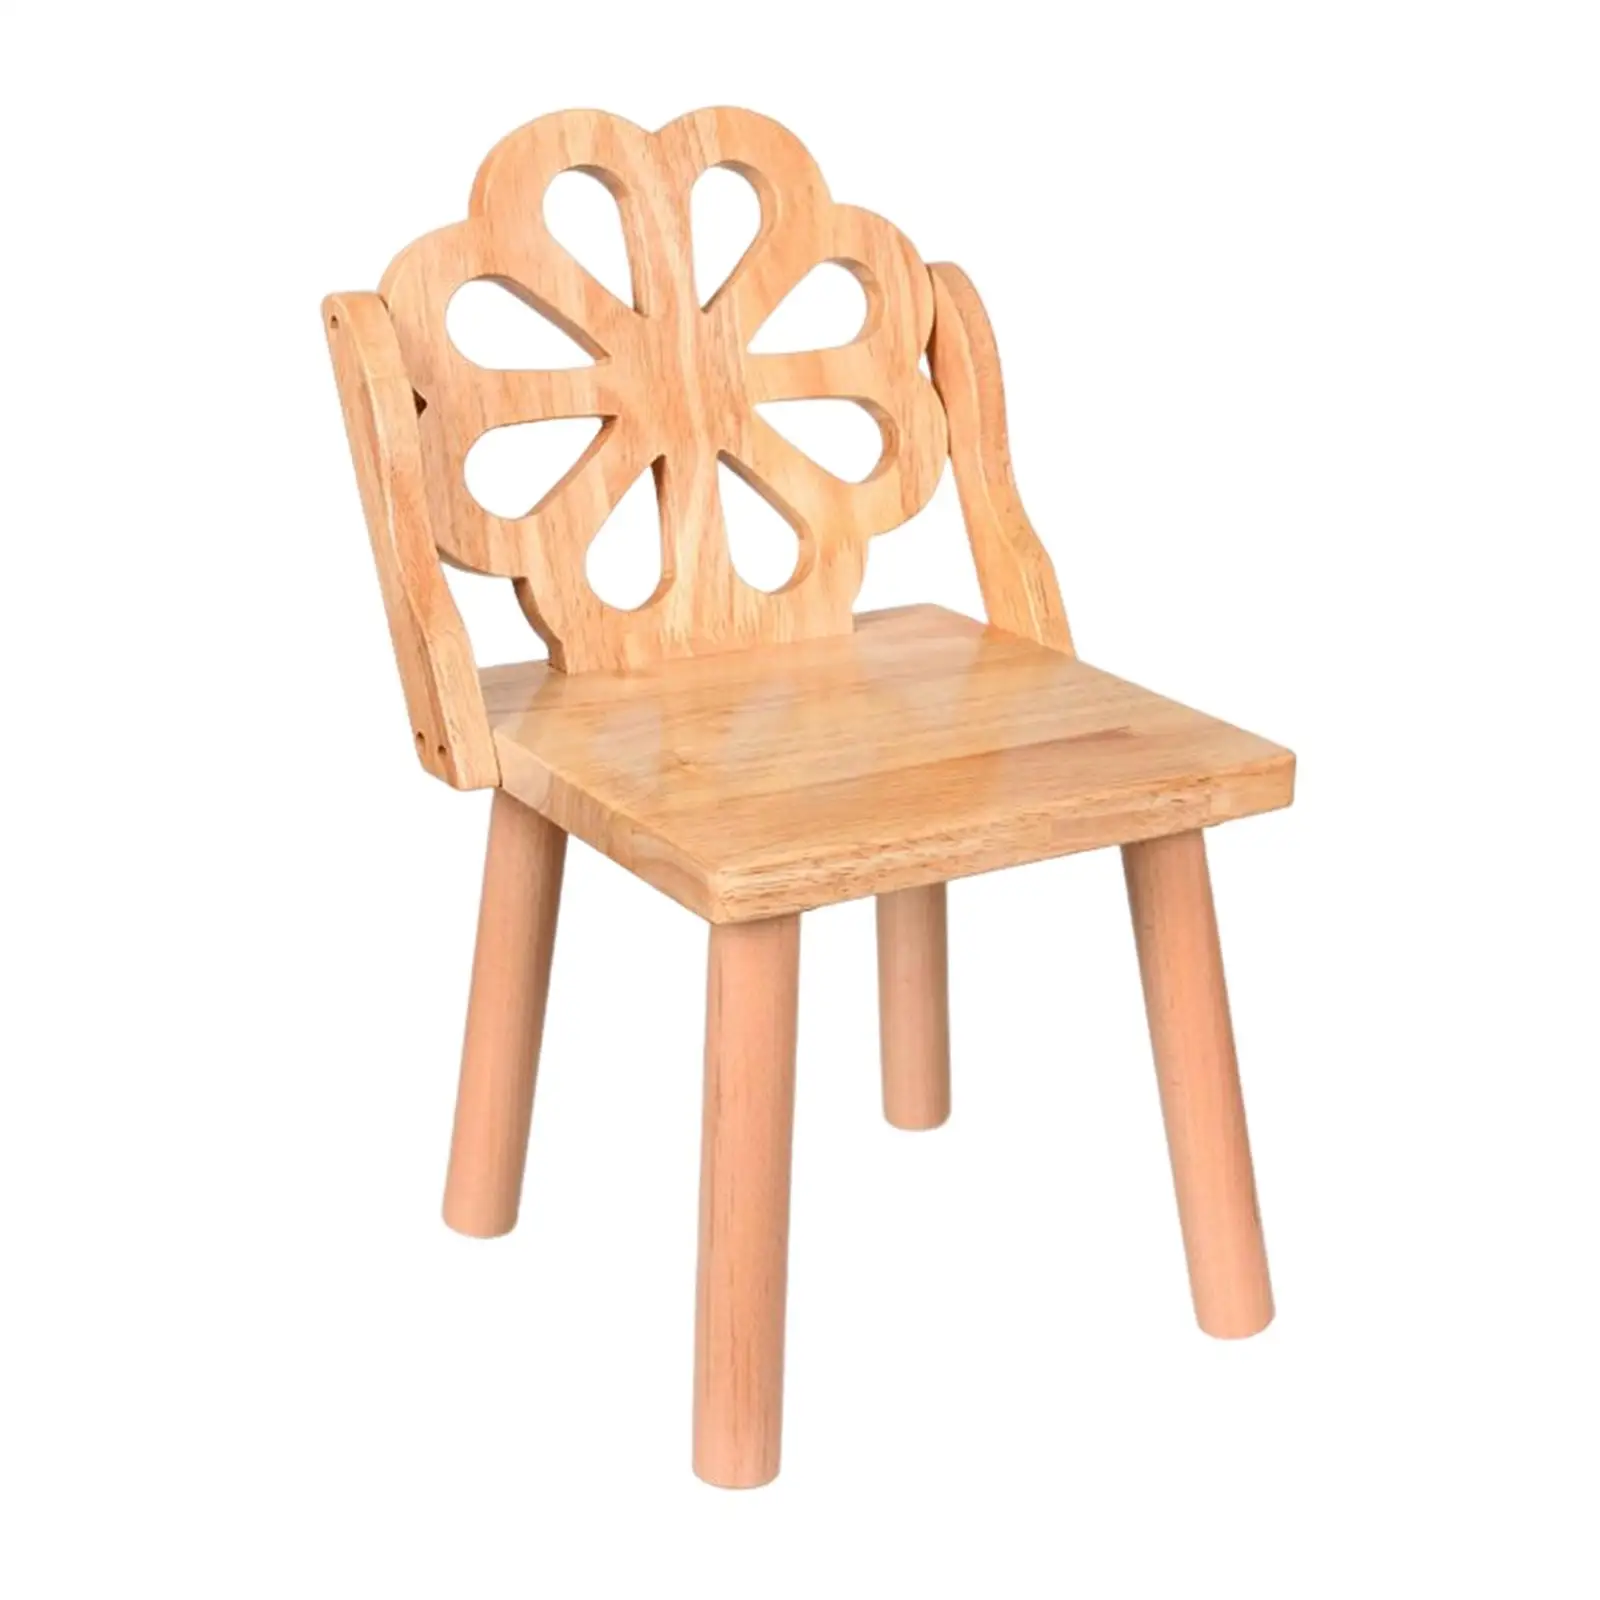 Household Removable Wooden Child Stool Wood High Chair Heavy Duty Anti Slip Lightweight Wooden Toys for Children for Bathroom